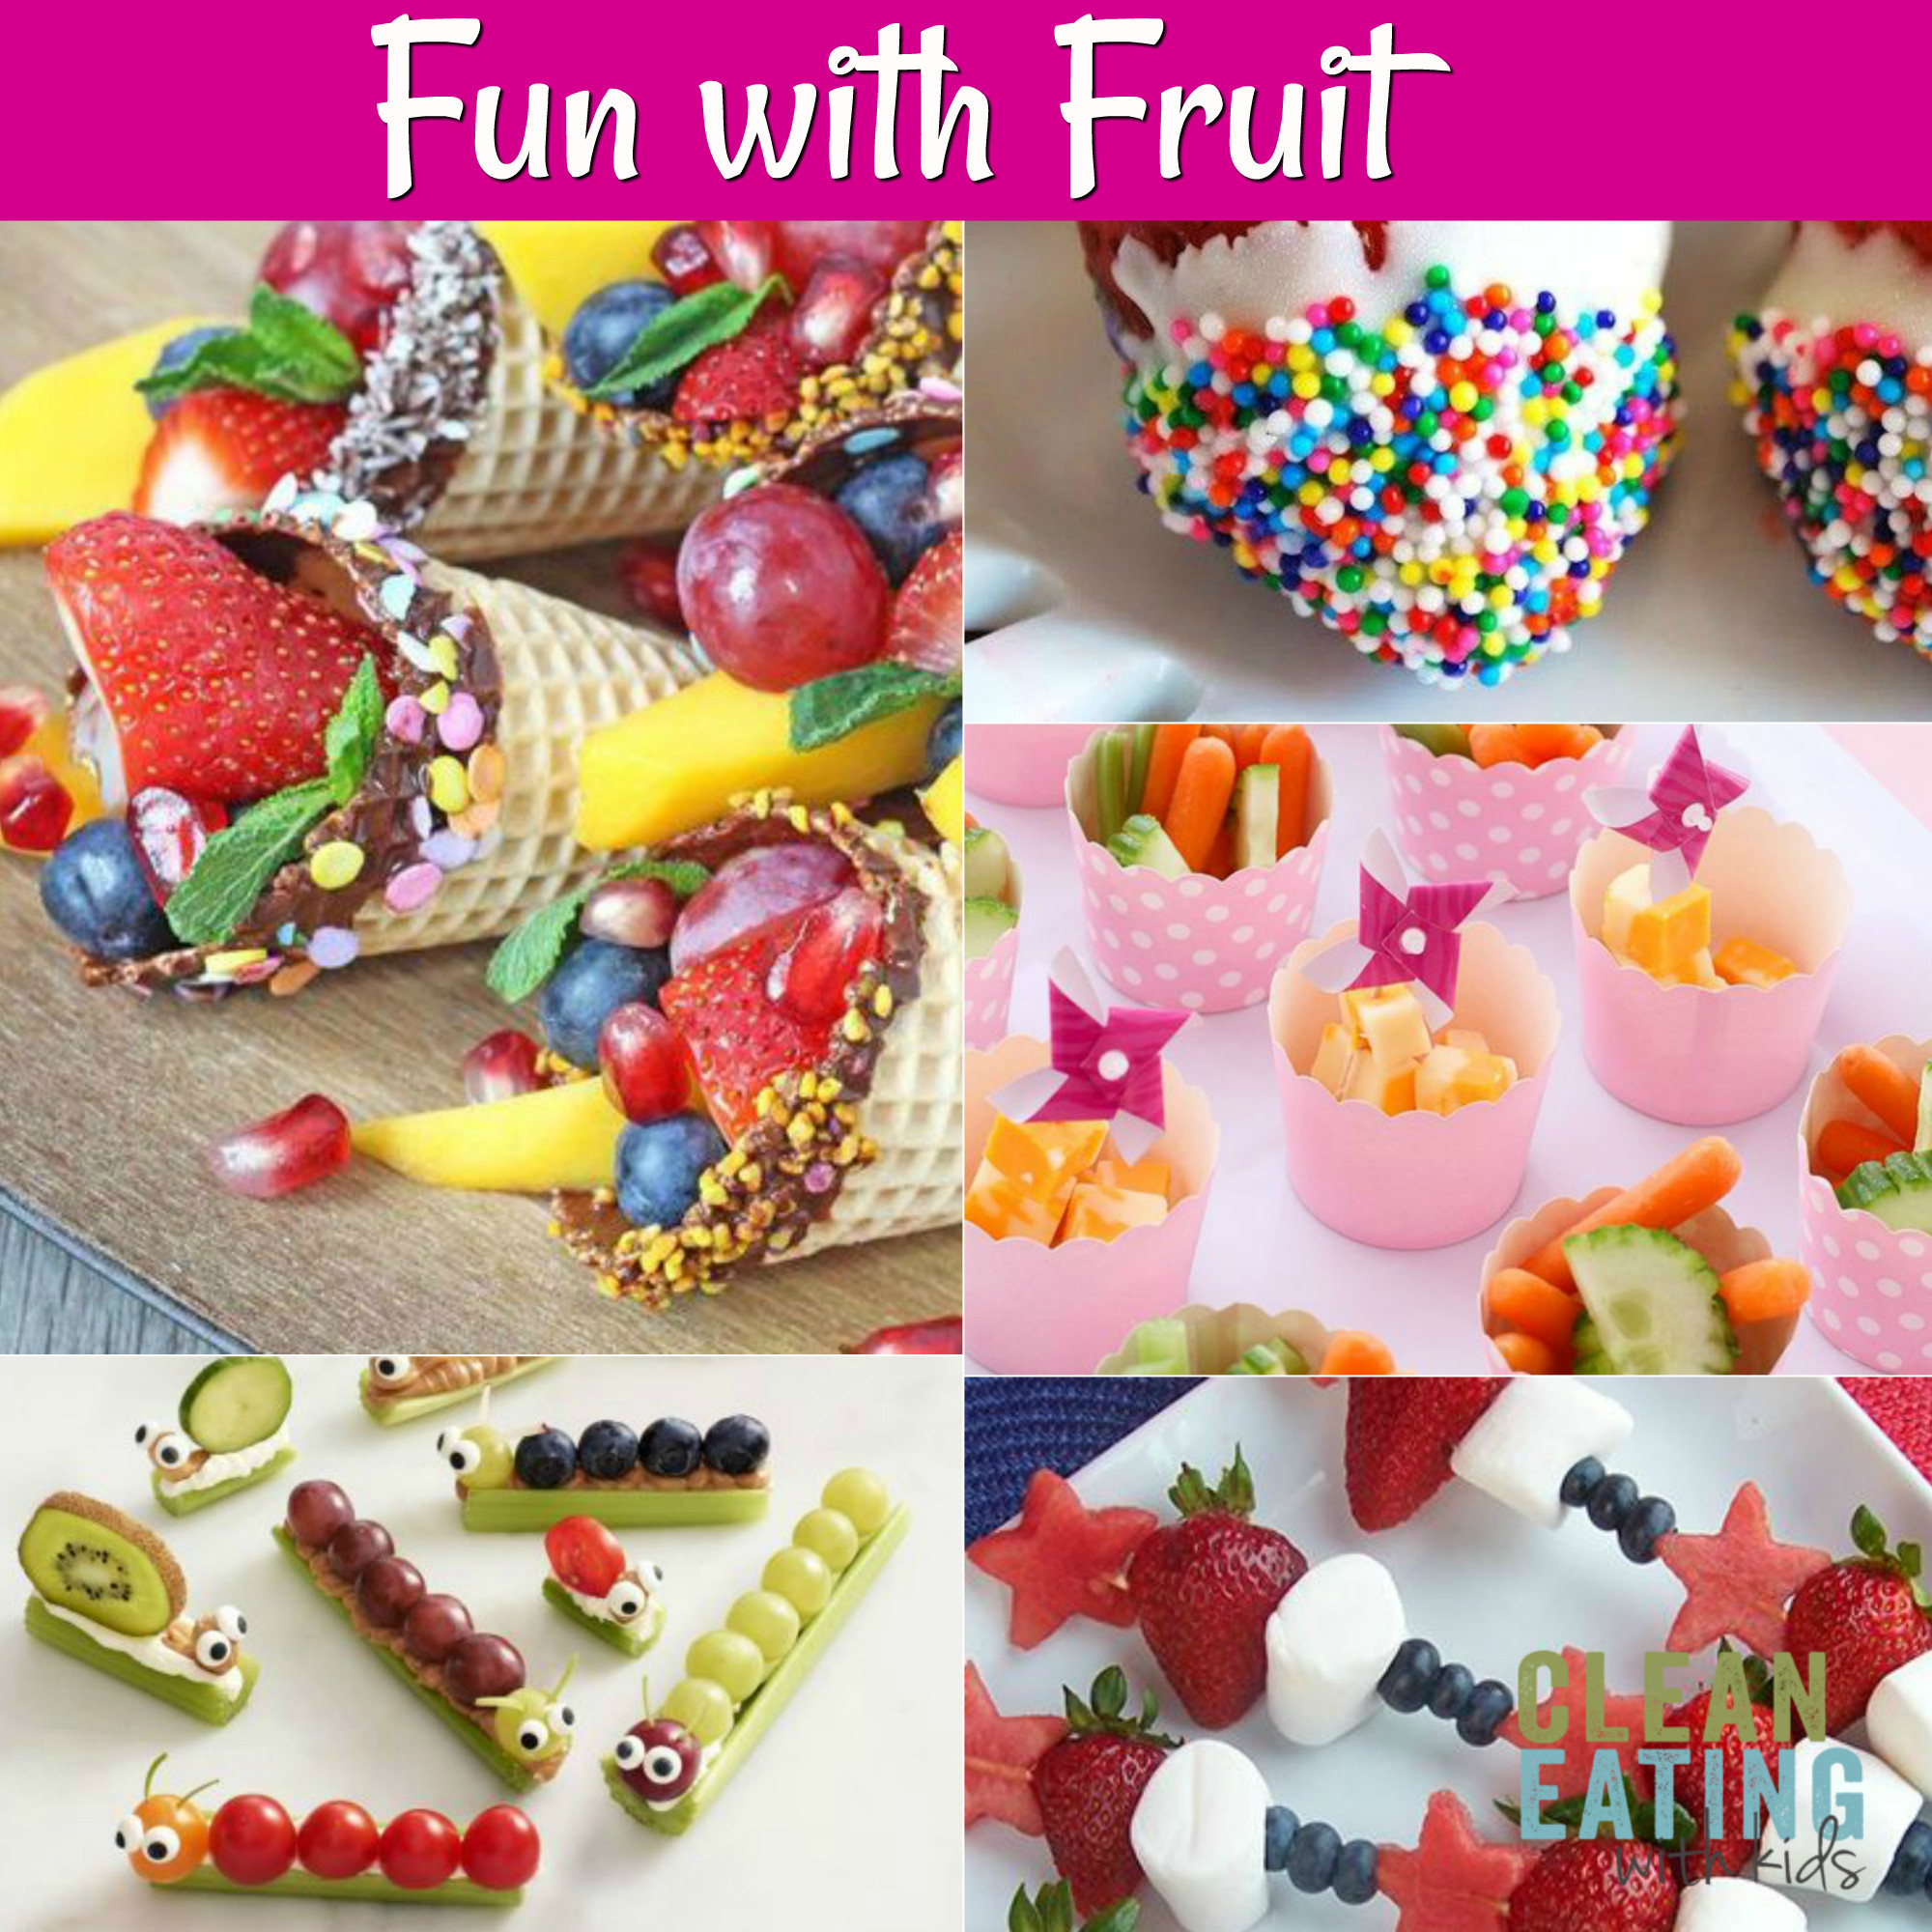 Toddler Party Food Ideas
 25 Healthy Birthday Party Food Ideas Clean Eating with kids